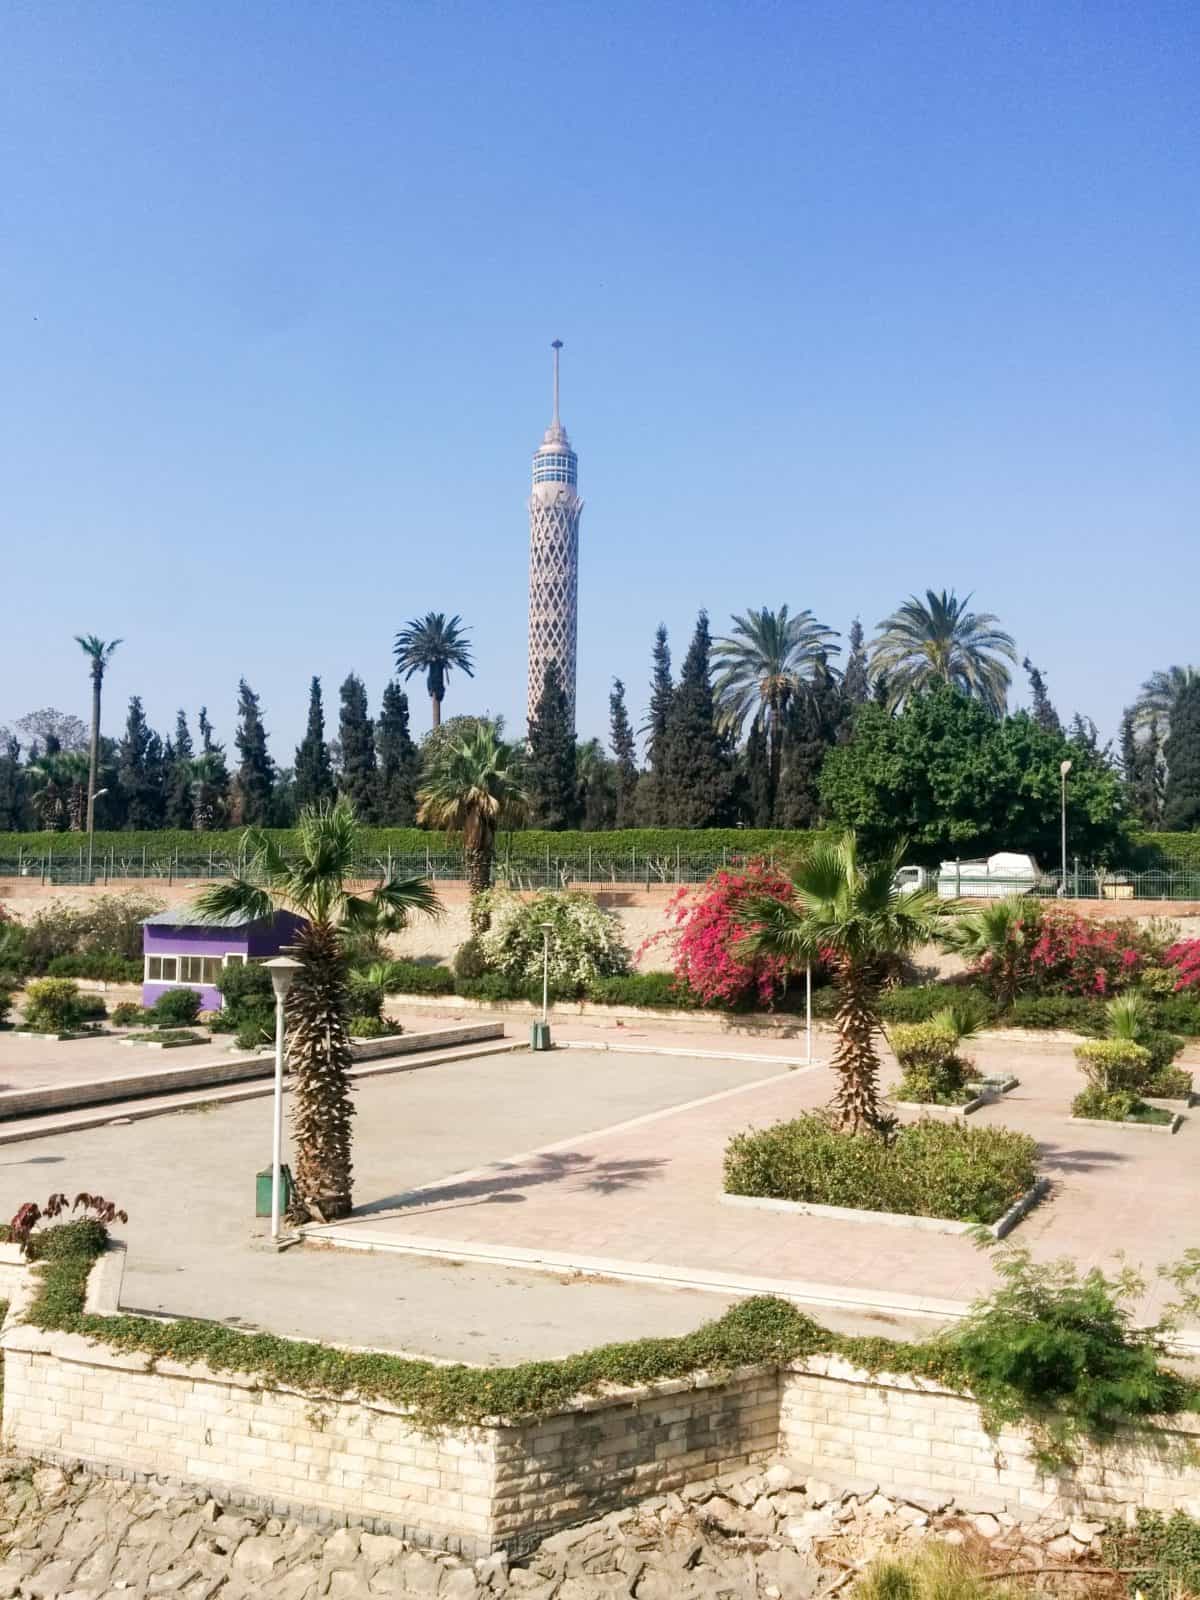 Scenery are one of the Pictures That Will Make You Want To Visit Cairo